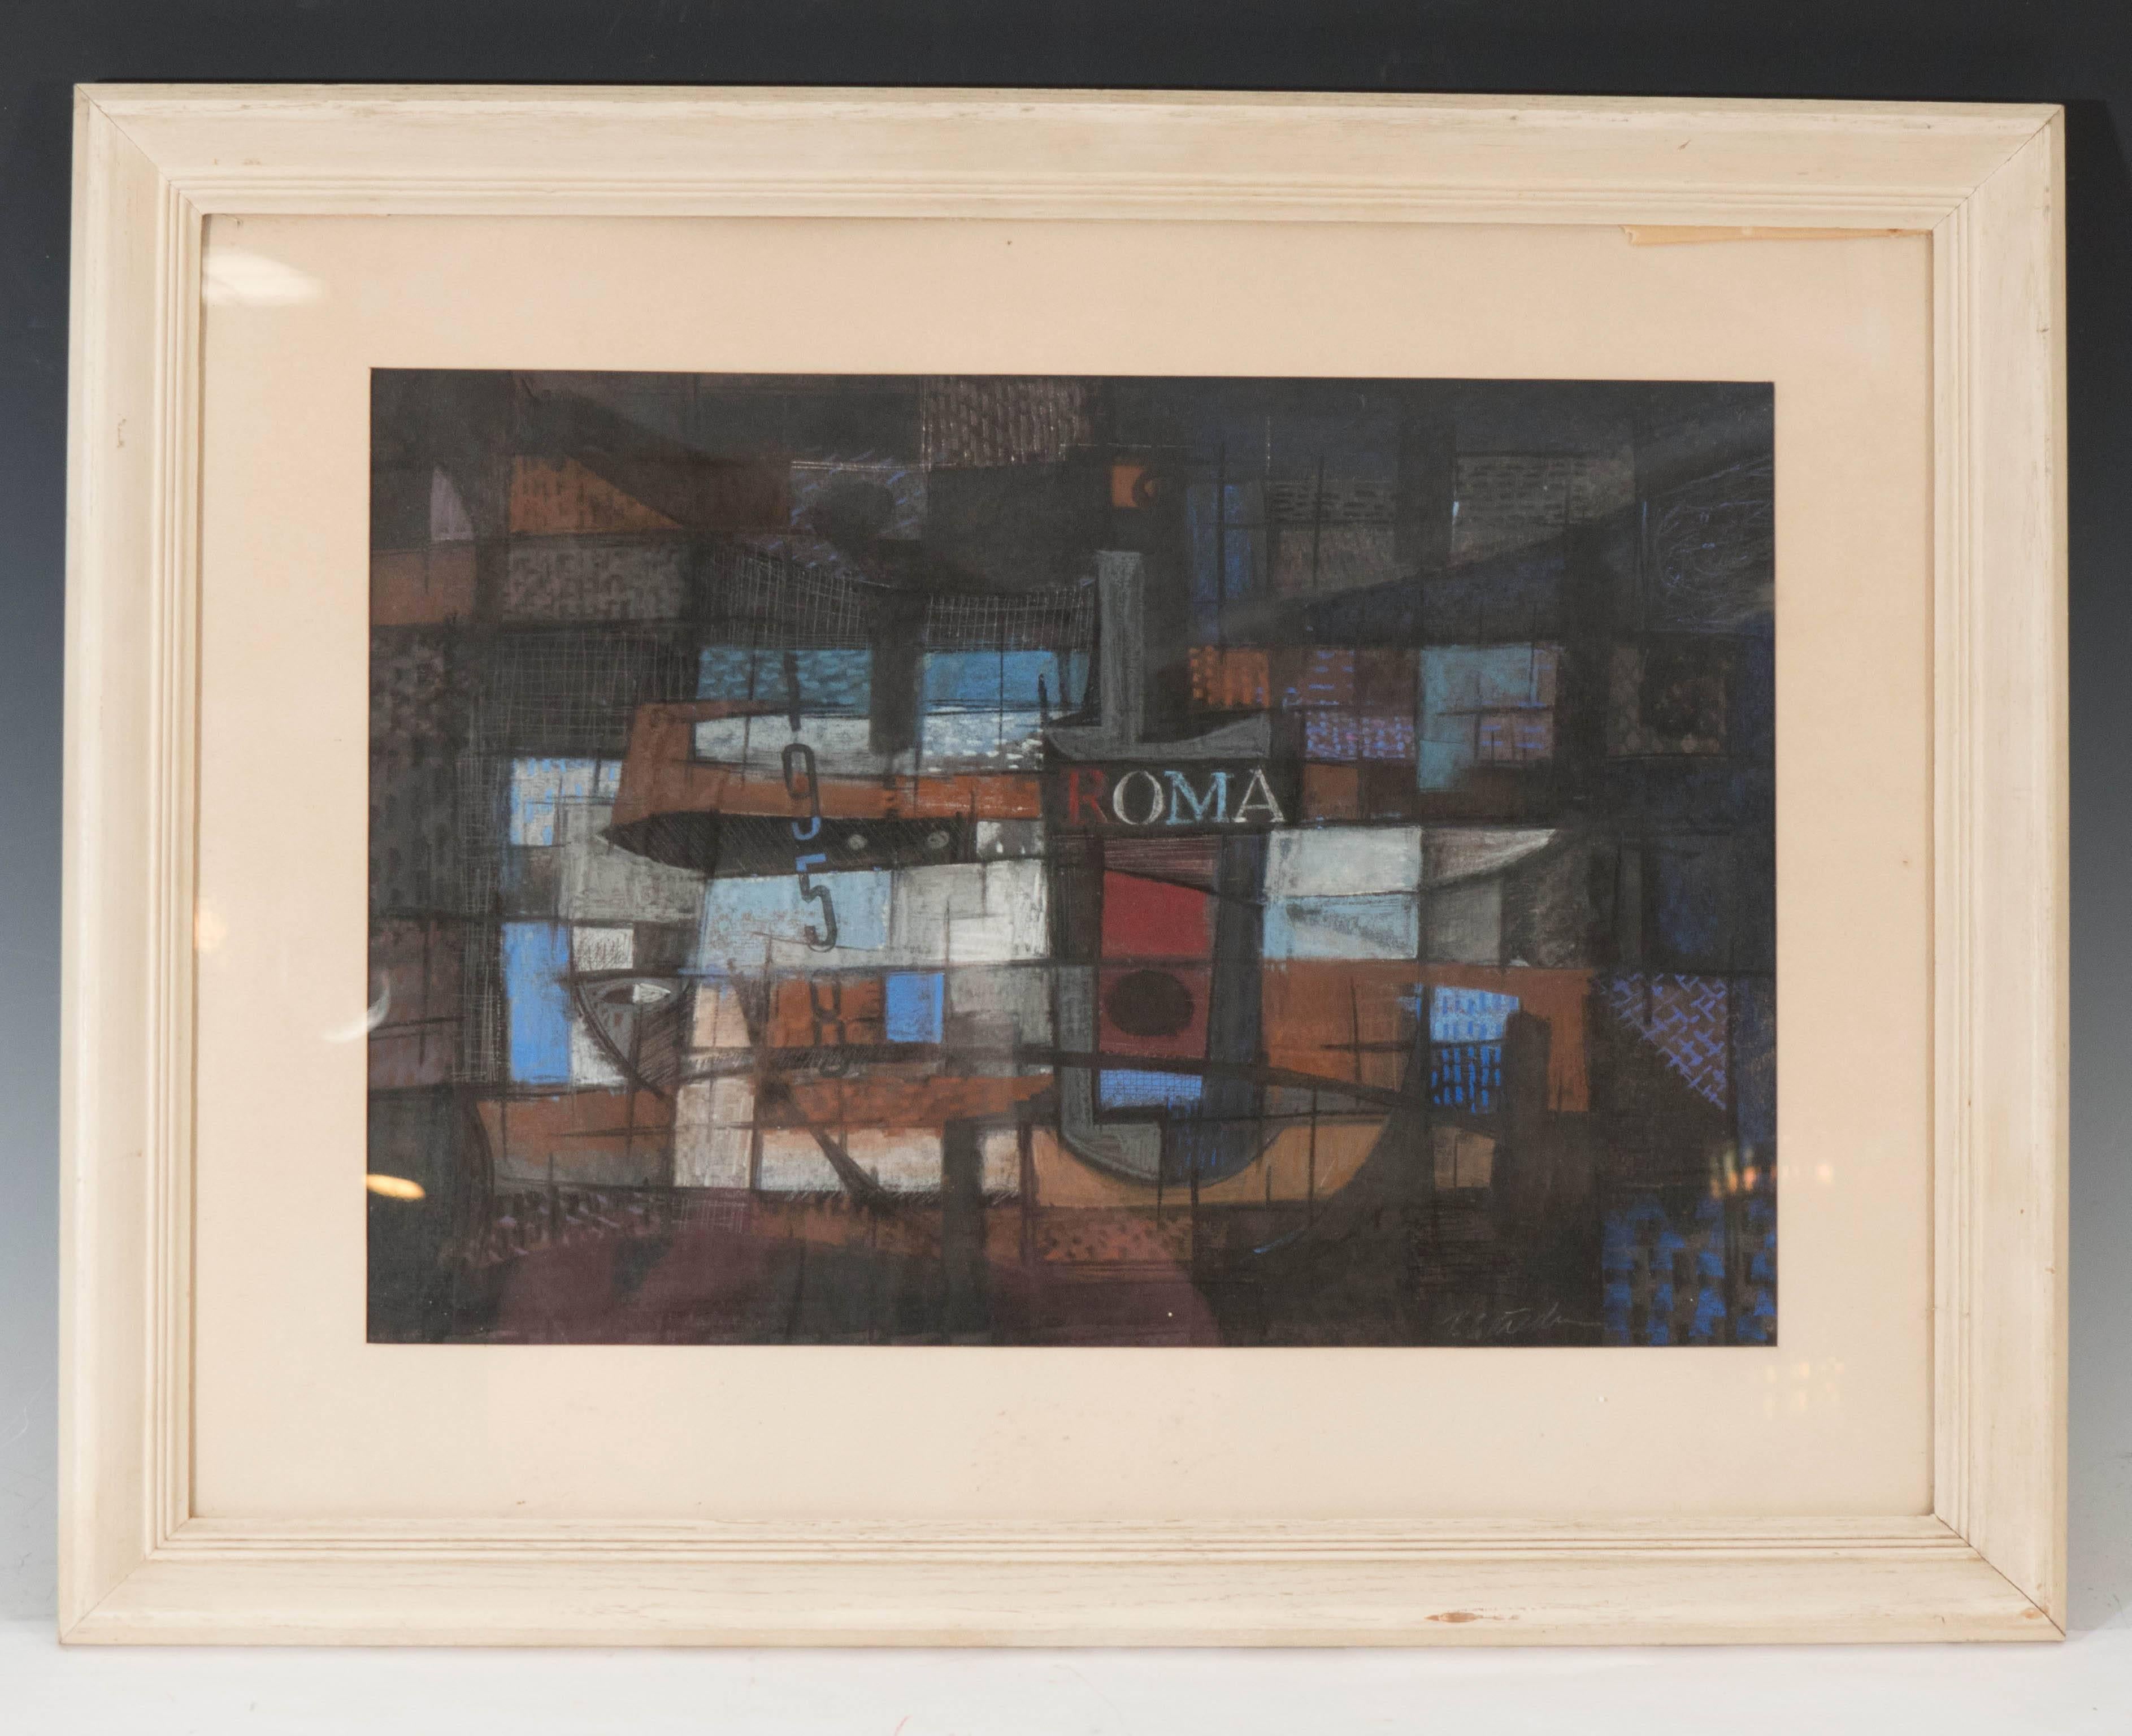 This modernistic pastel on paper depicts a cubist rendering of a wine bottle on a table, including fragmented text '1958' and 'ROMA.' Markings include artist's (indiscernible) signature, to the lower right corner. Overall good condition, with wear